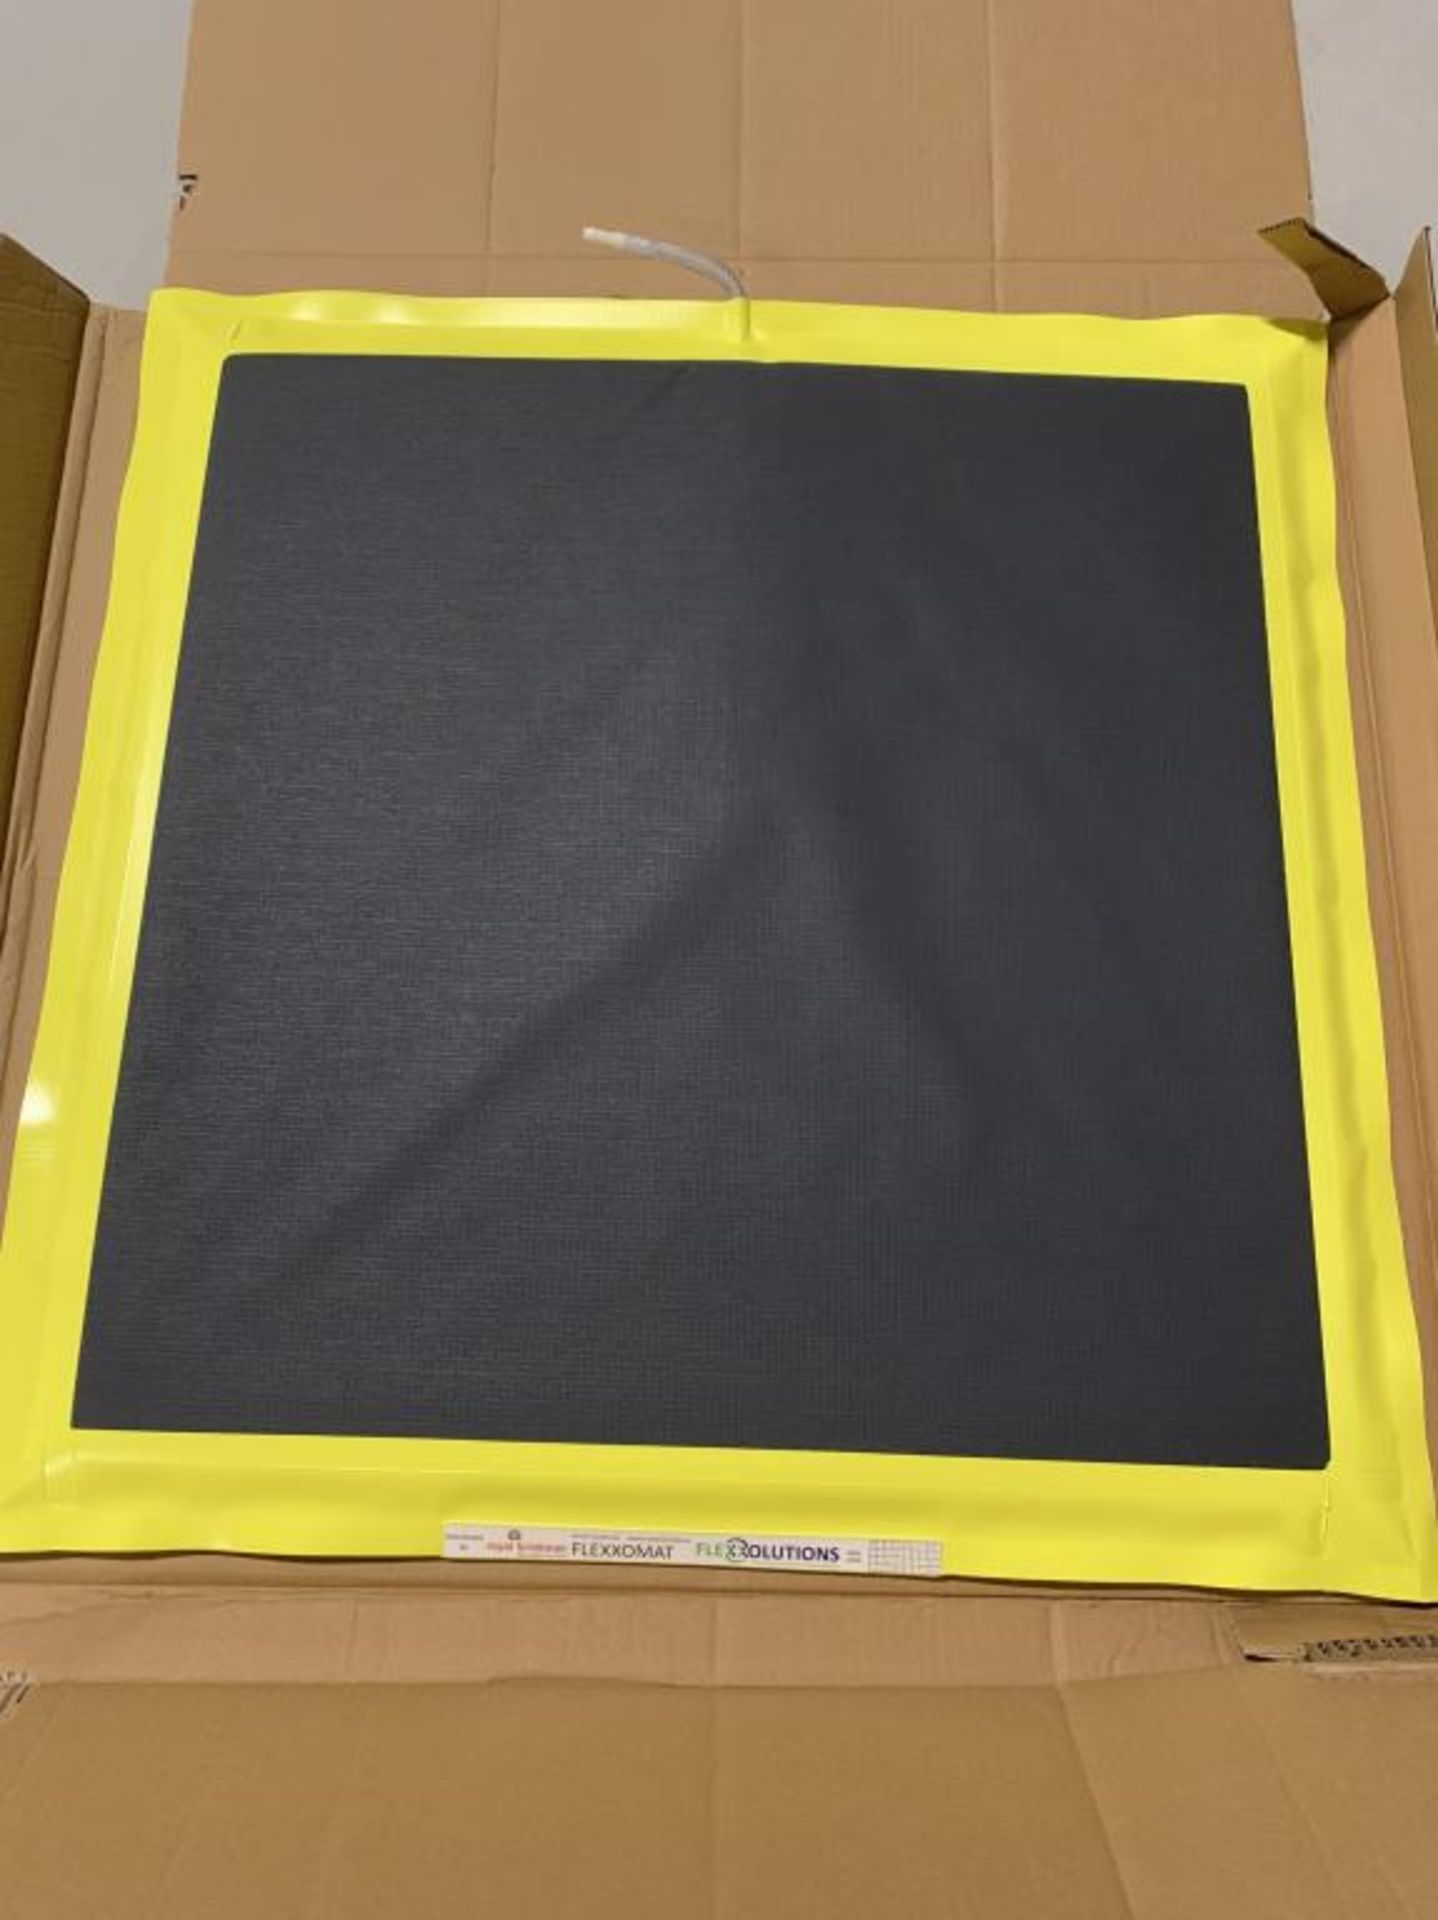 New Disinfection Mats, 90cm x 90cm - Image 2 of 12